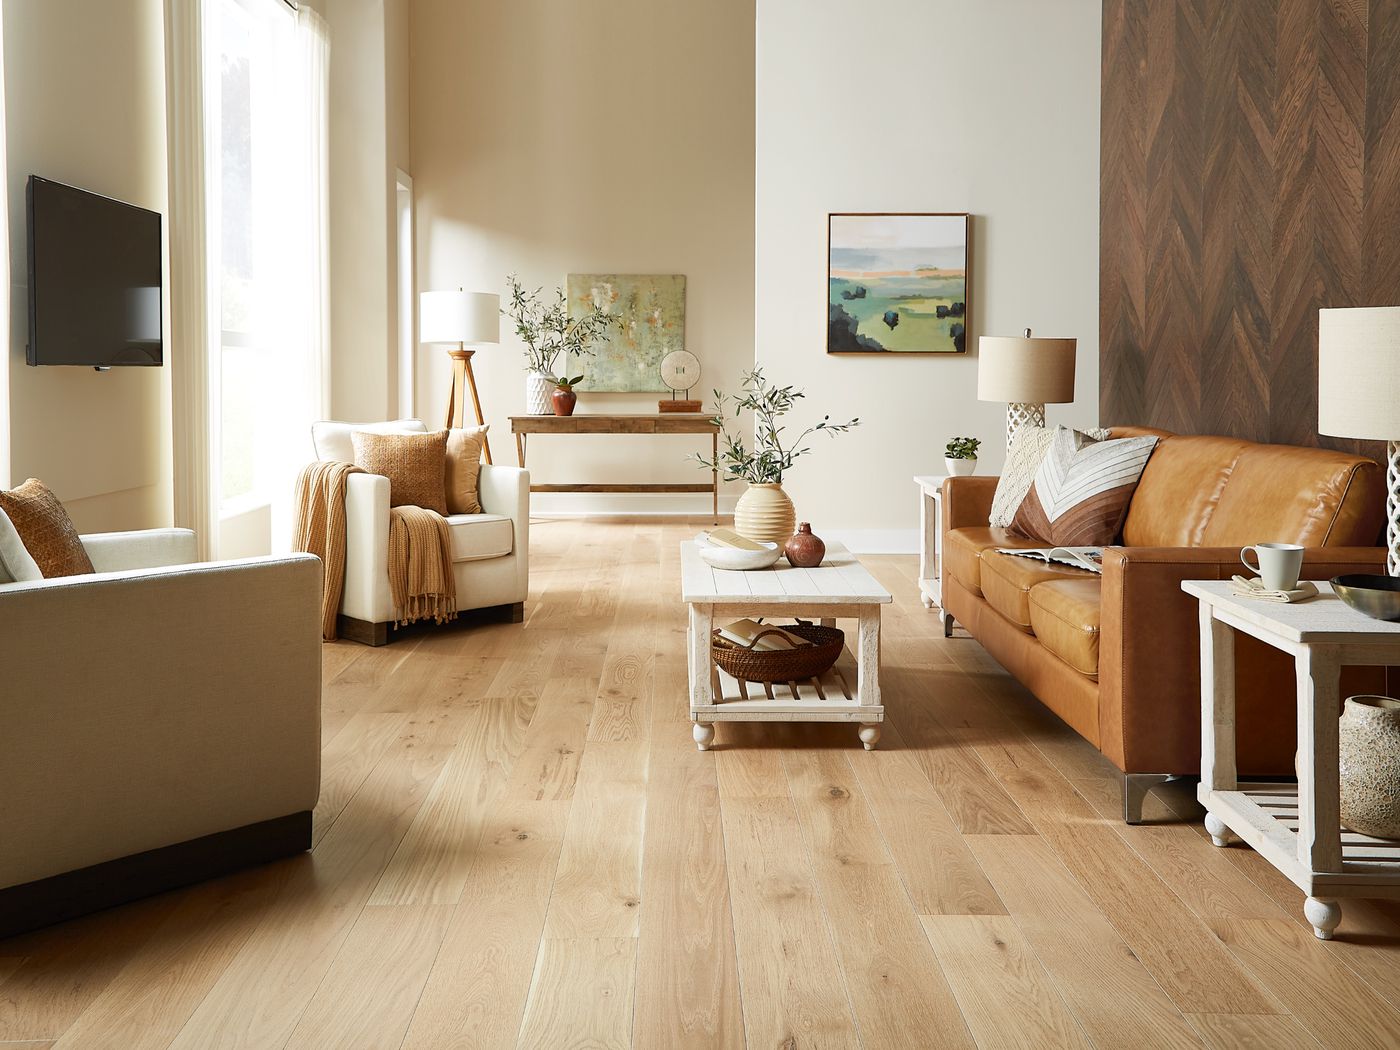 What To Consider When Purchasing Hardwood